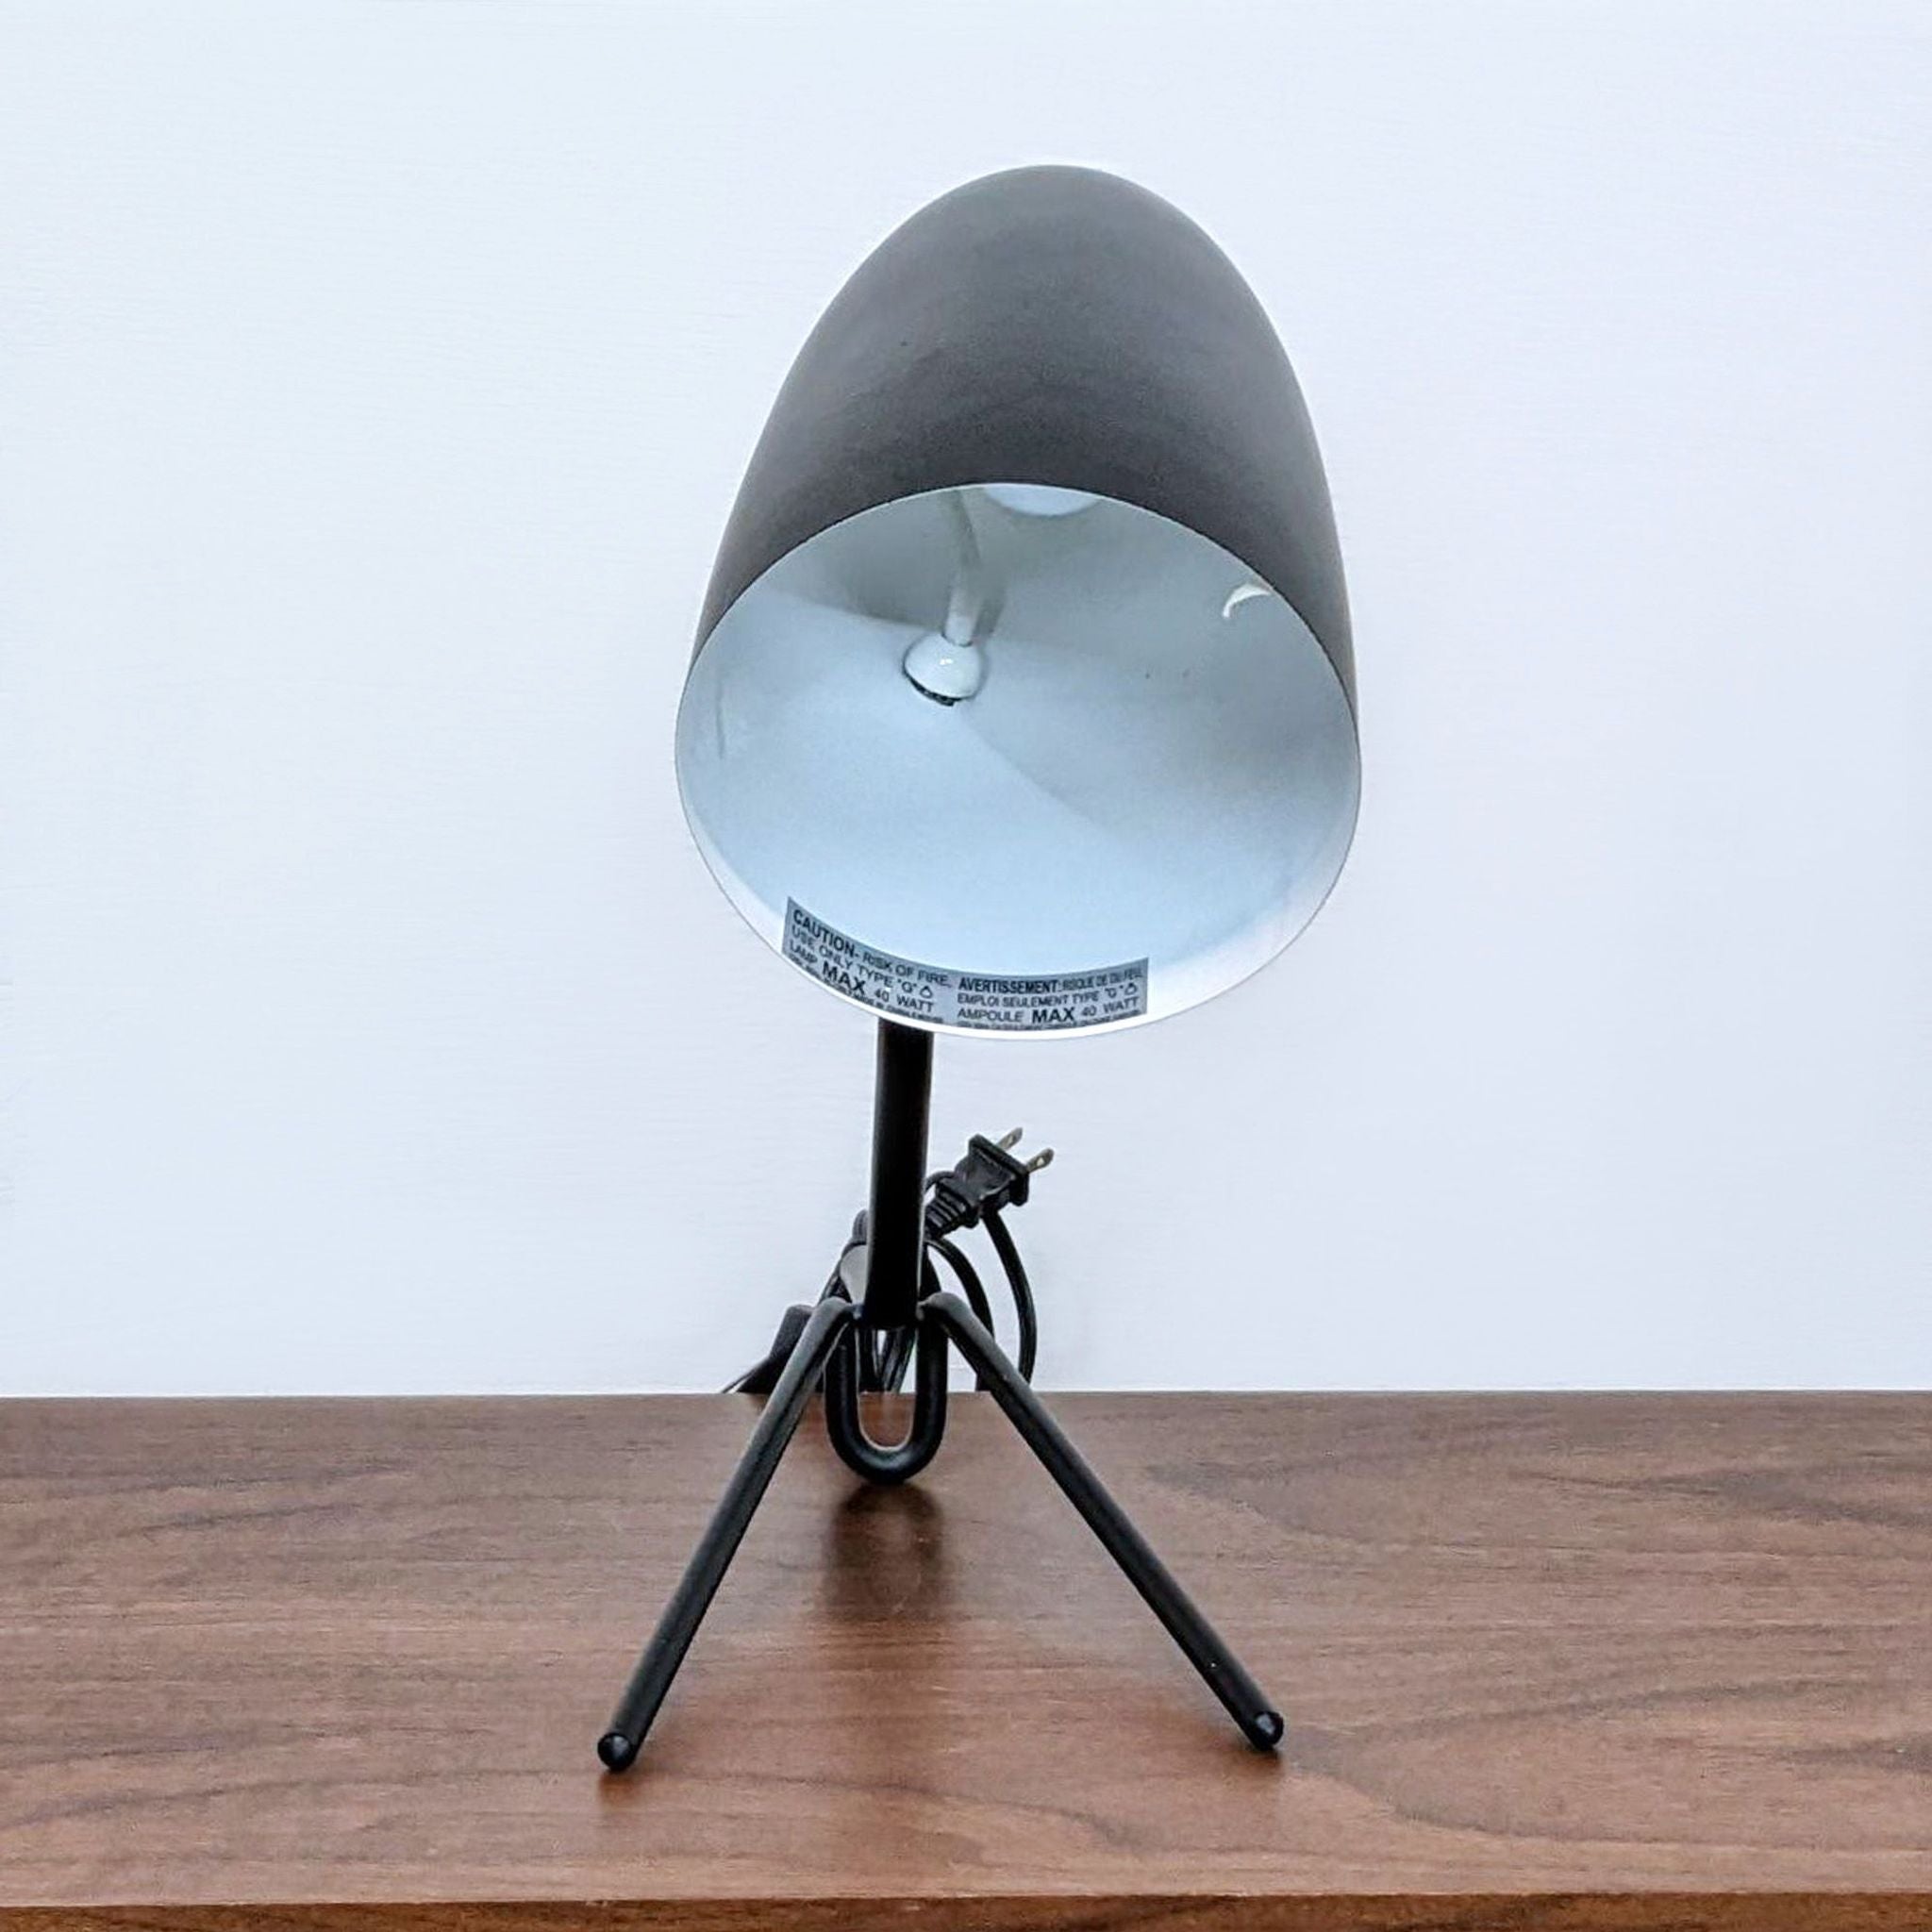 Modern Reperch desk lamp featuring a matte black finish, adjustable angle, and visible cord on a wooden desk.